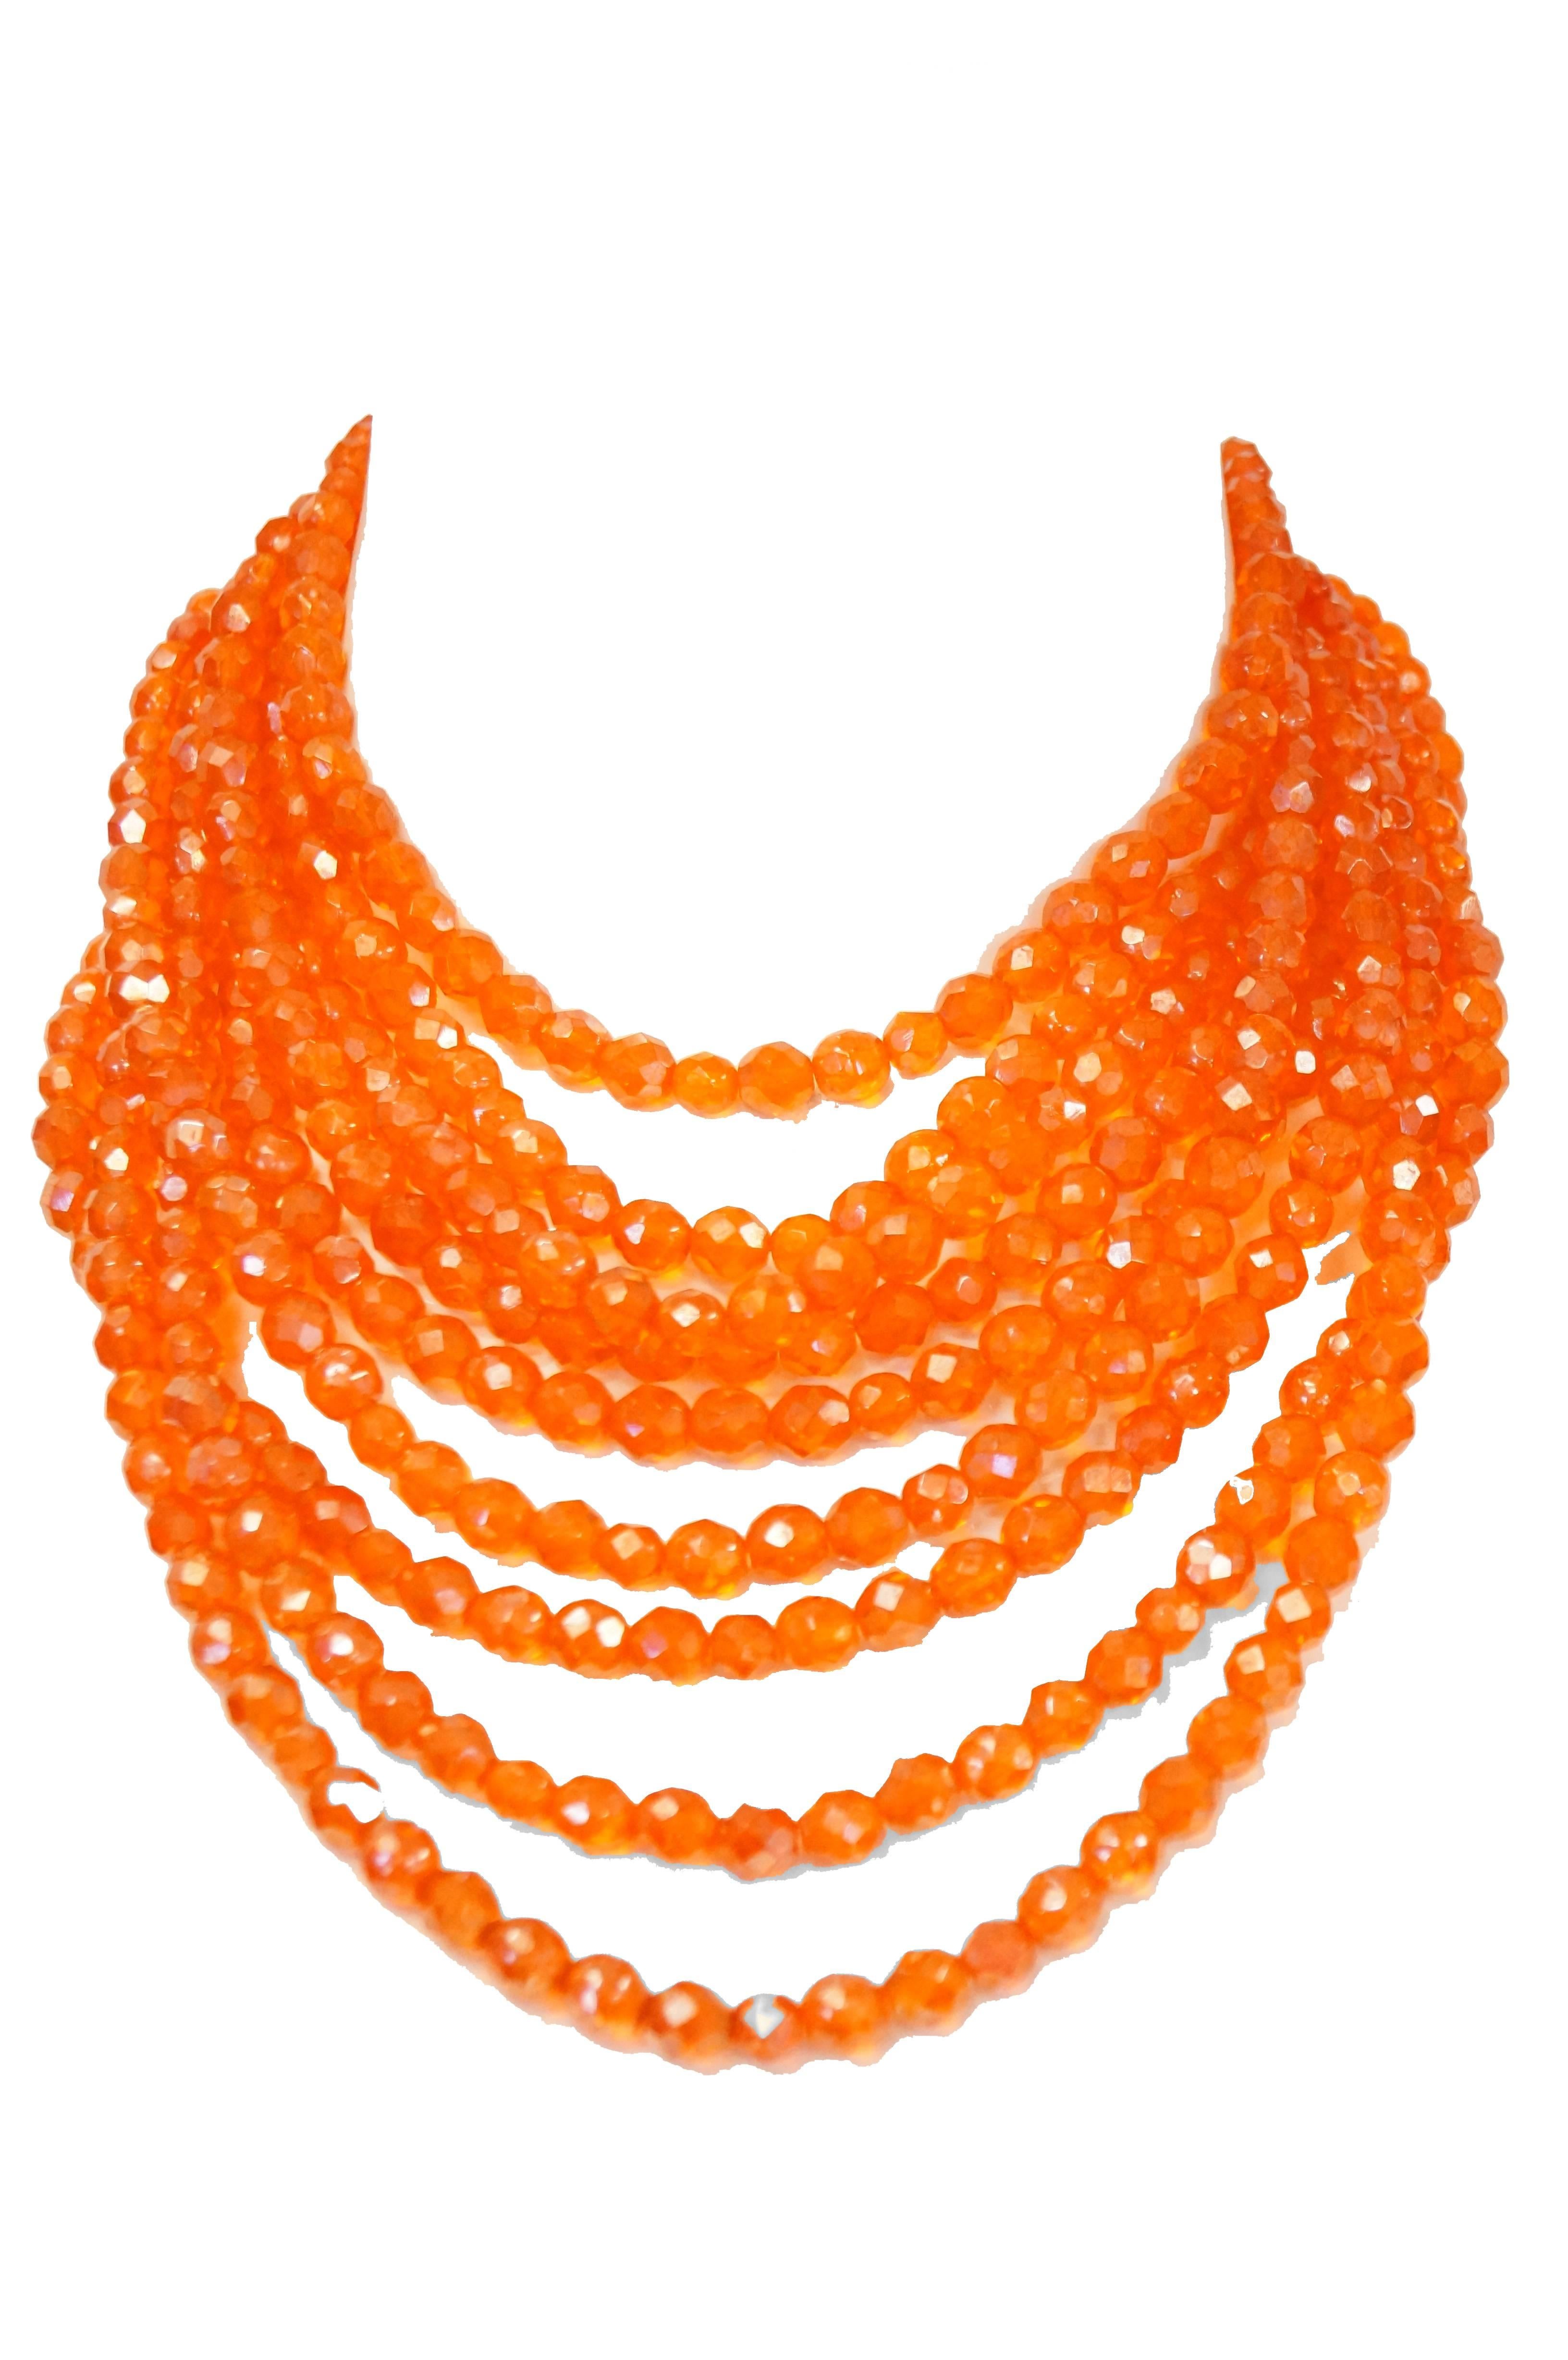 Fabulous multistrand orange necklace by Coppola e Toppo! The necklace is composed of nine separate strands of beads brought together at the ends by the decorated clasp. The clasps of the necklace are composed of a triangular bronze base decorated by